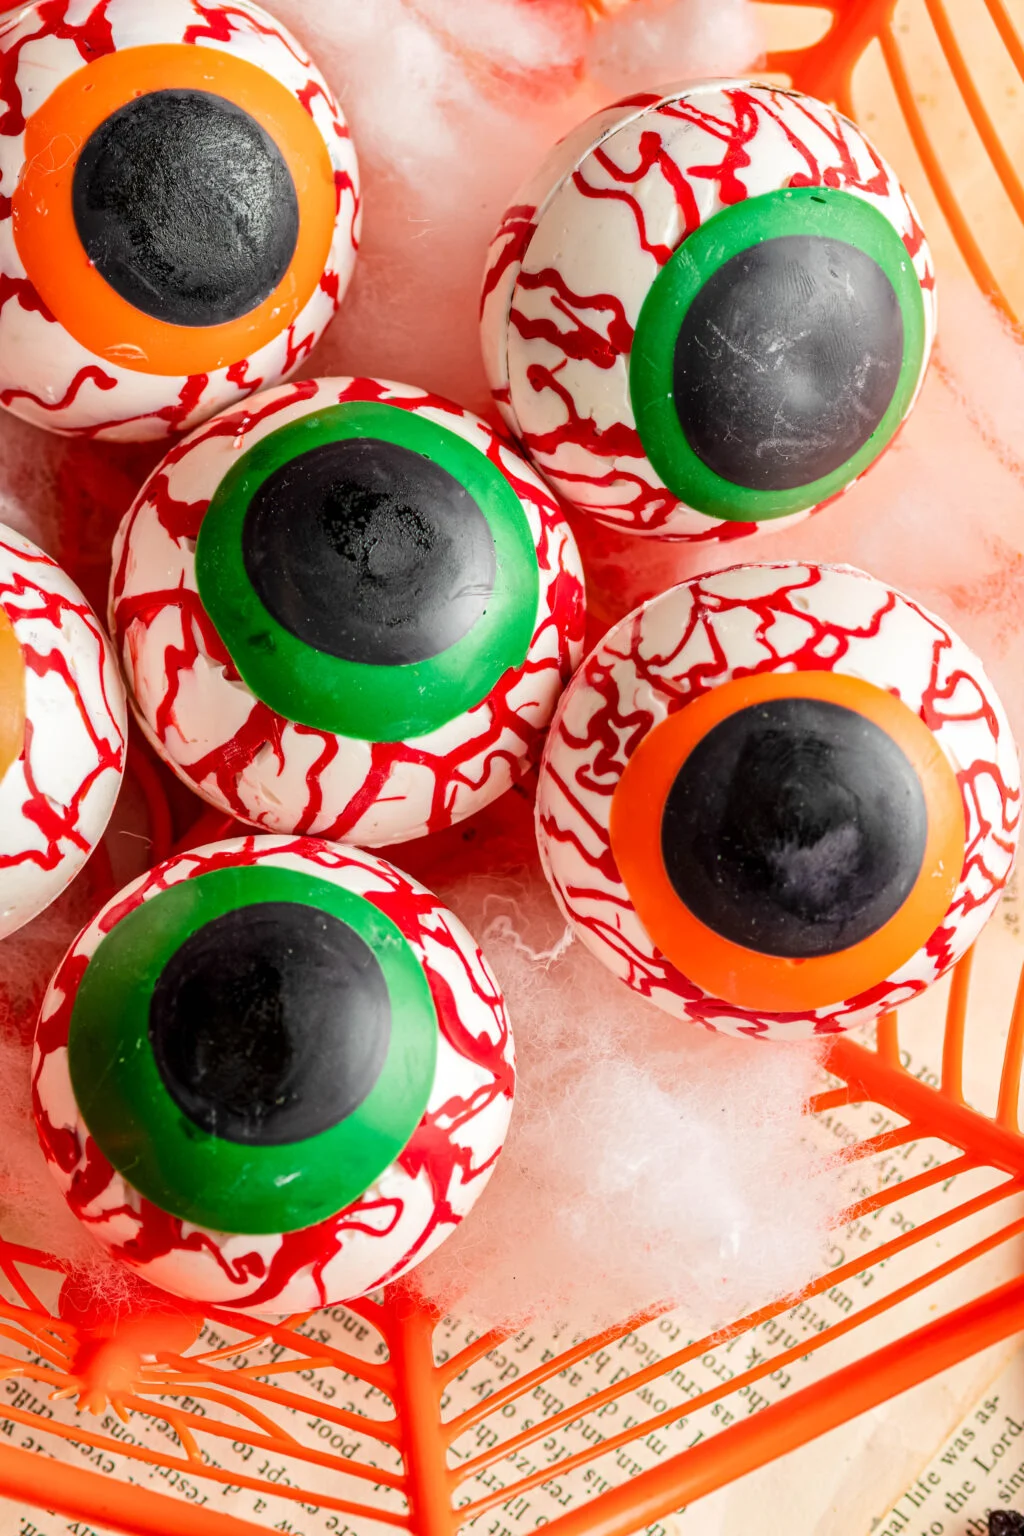 eyeball hot cocoa bombs in an orange container